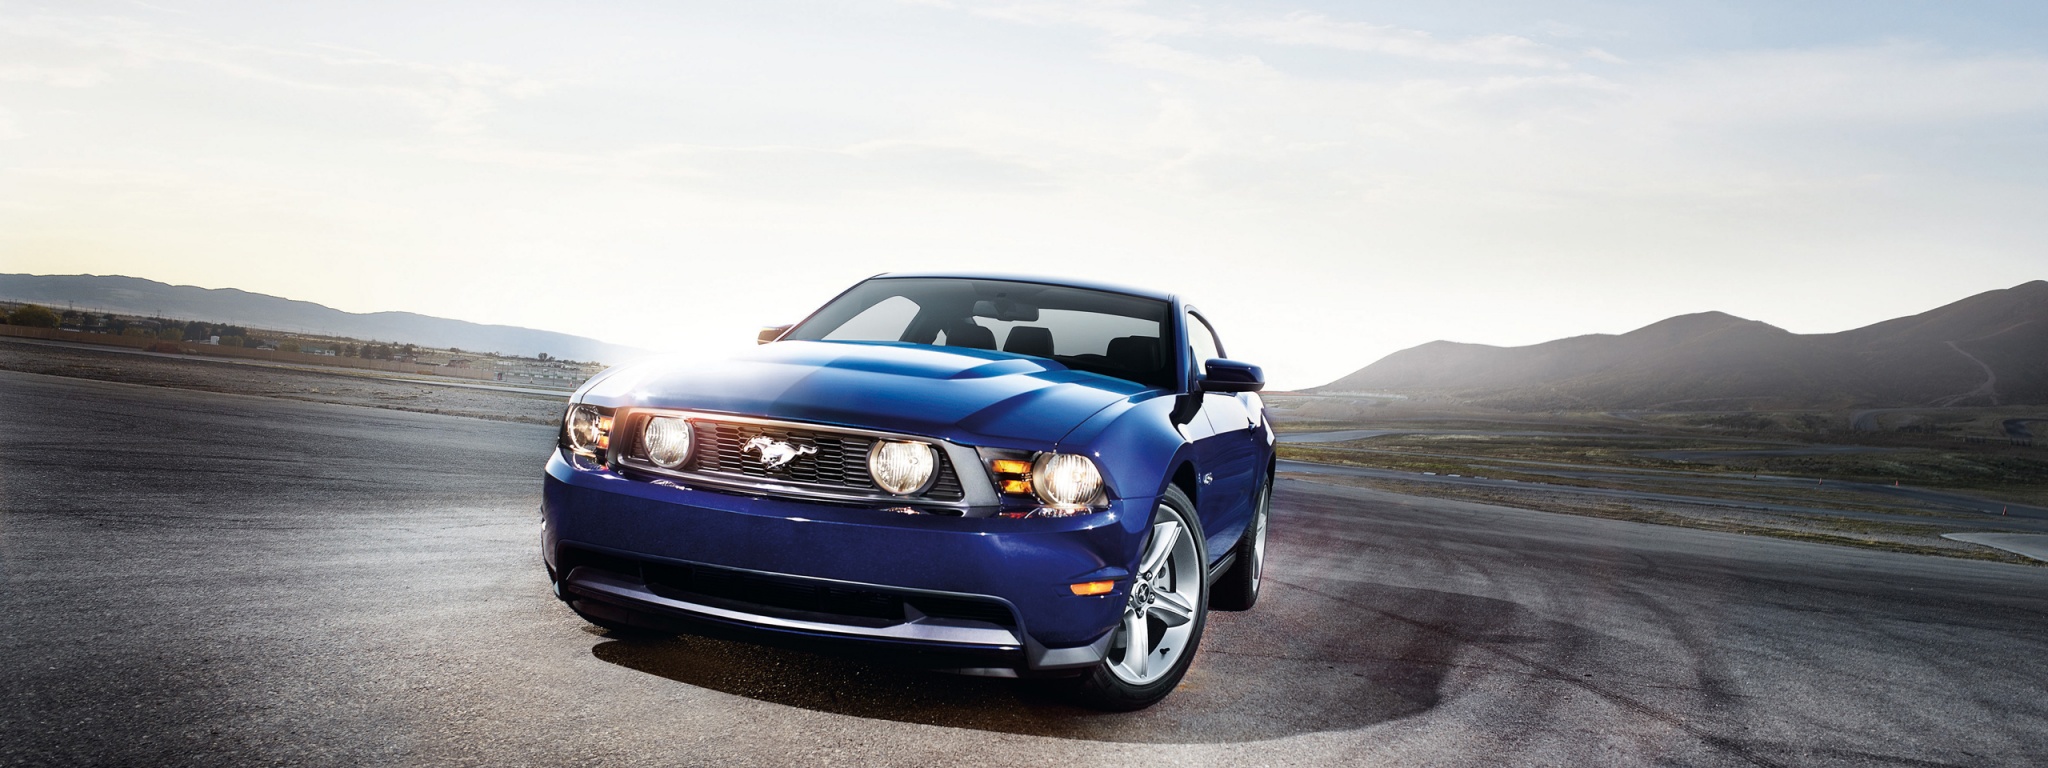 Ford Mustang Shelby Gt500 2012